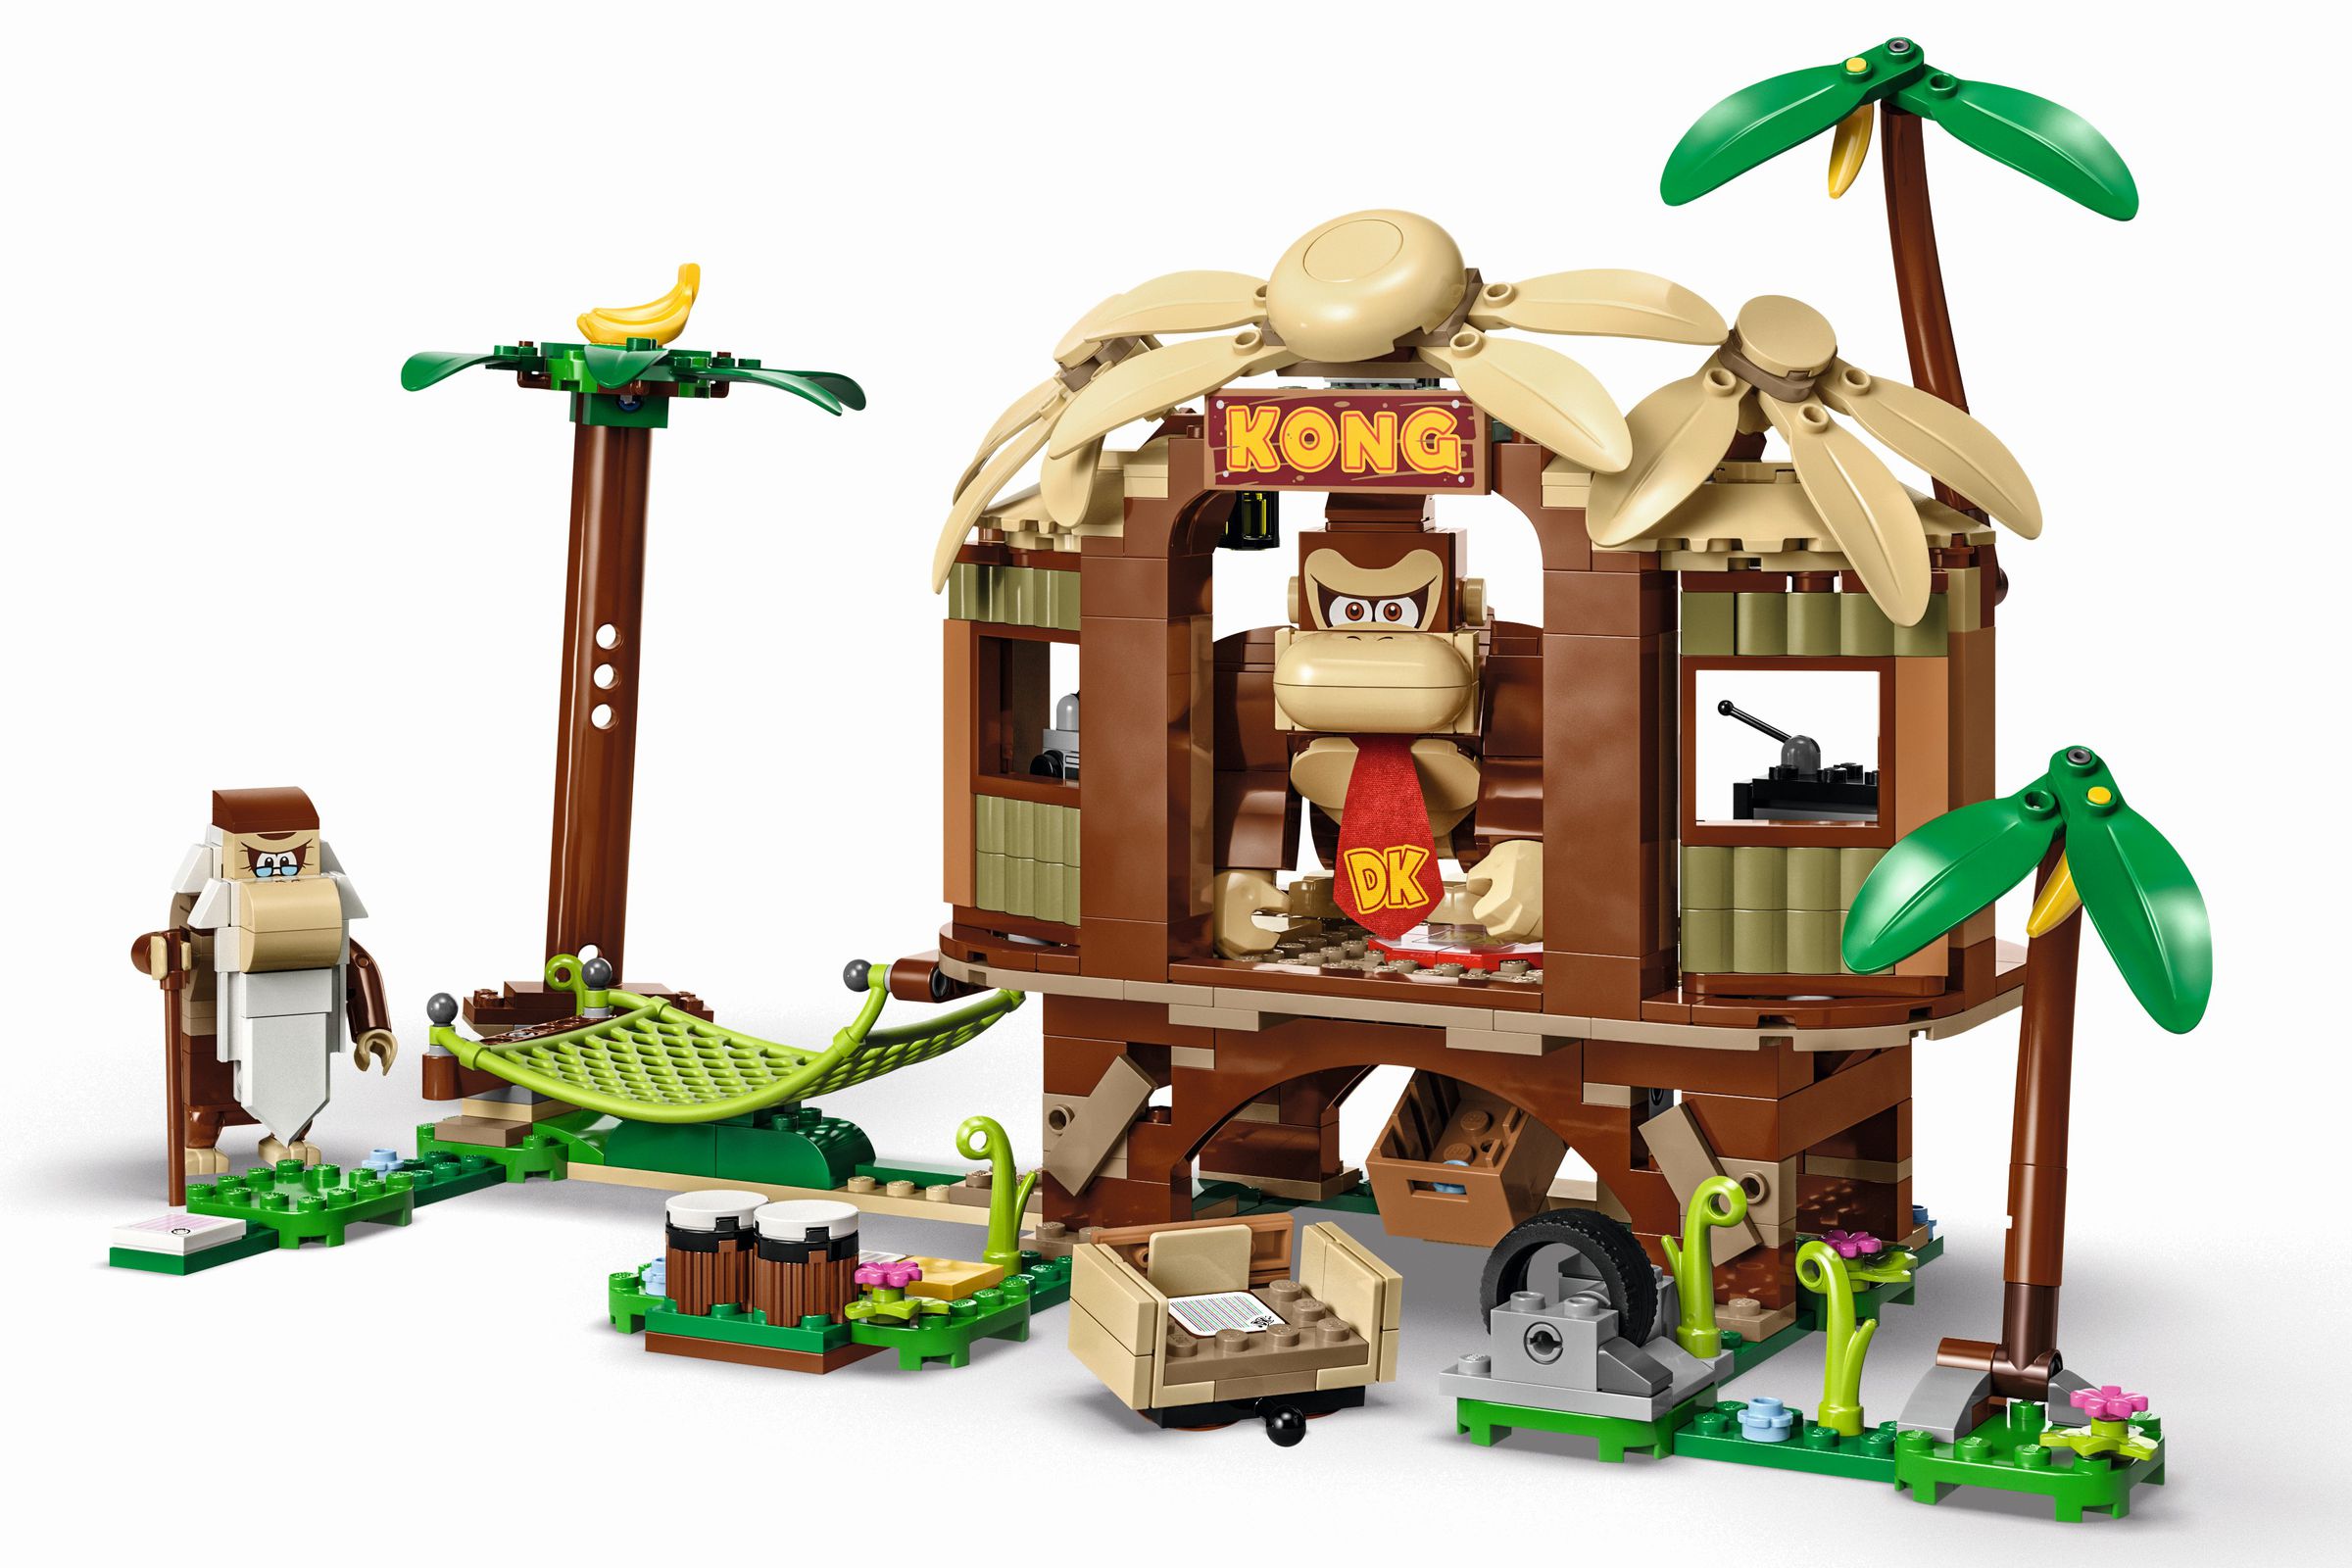 Donkey Kong peeks out of his Lego tree house.